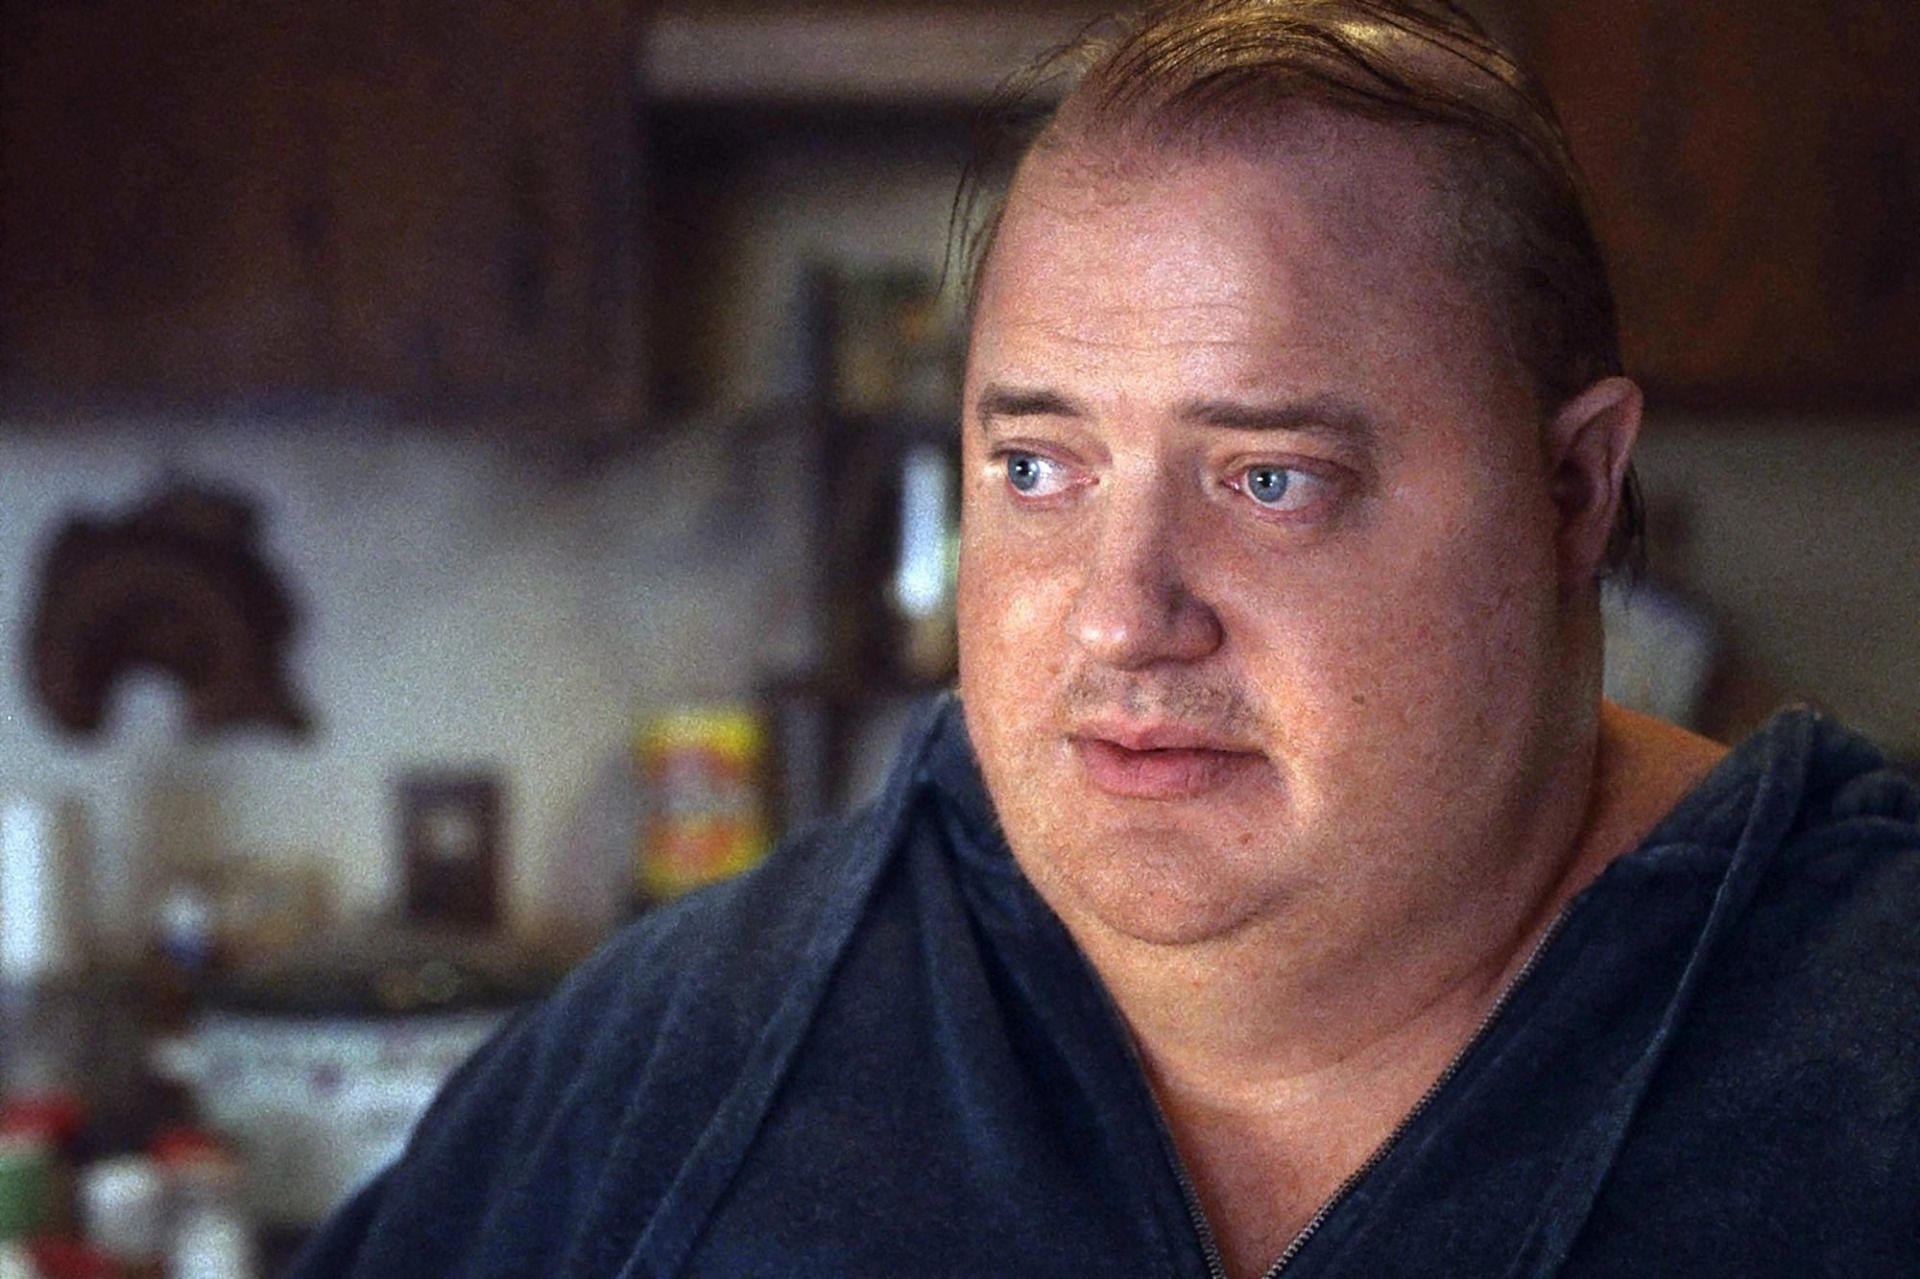 Brendan Fraser stars as Charlie in The Whale. (Photo via YouTube/A24)